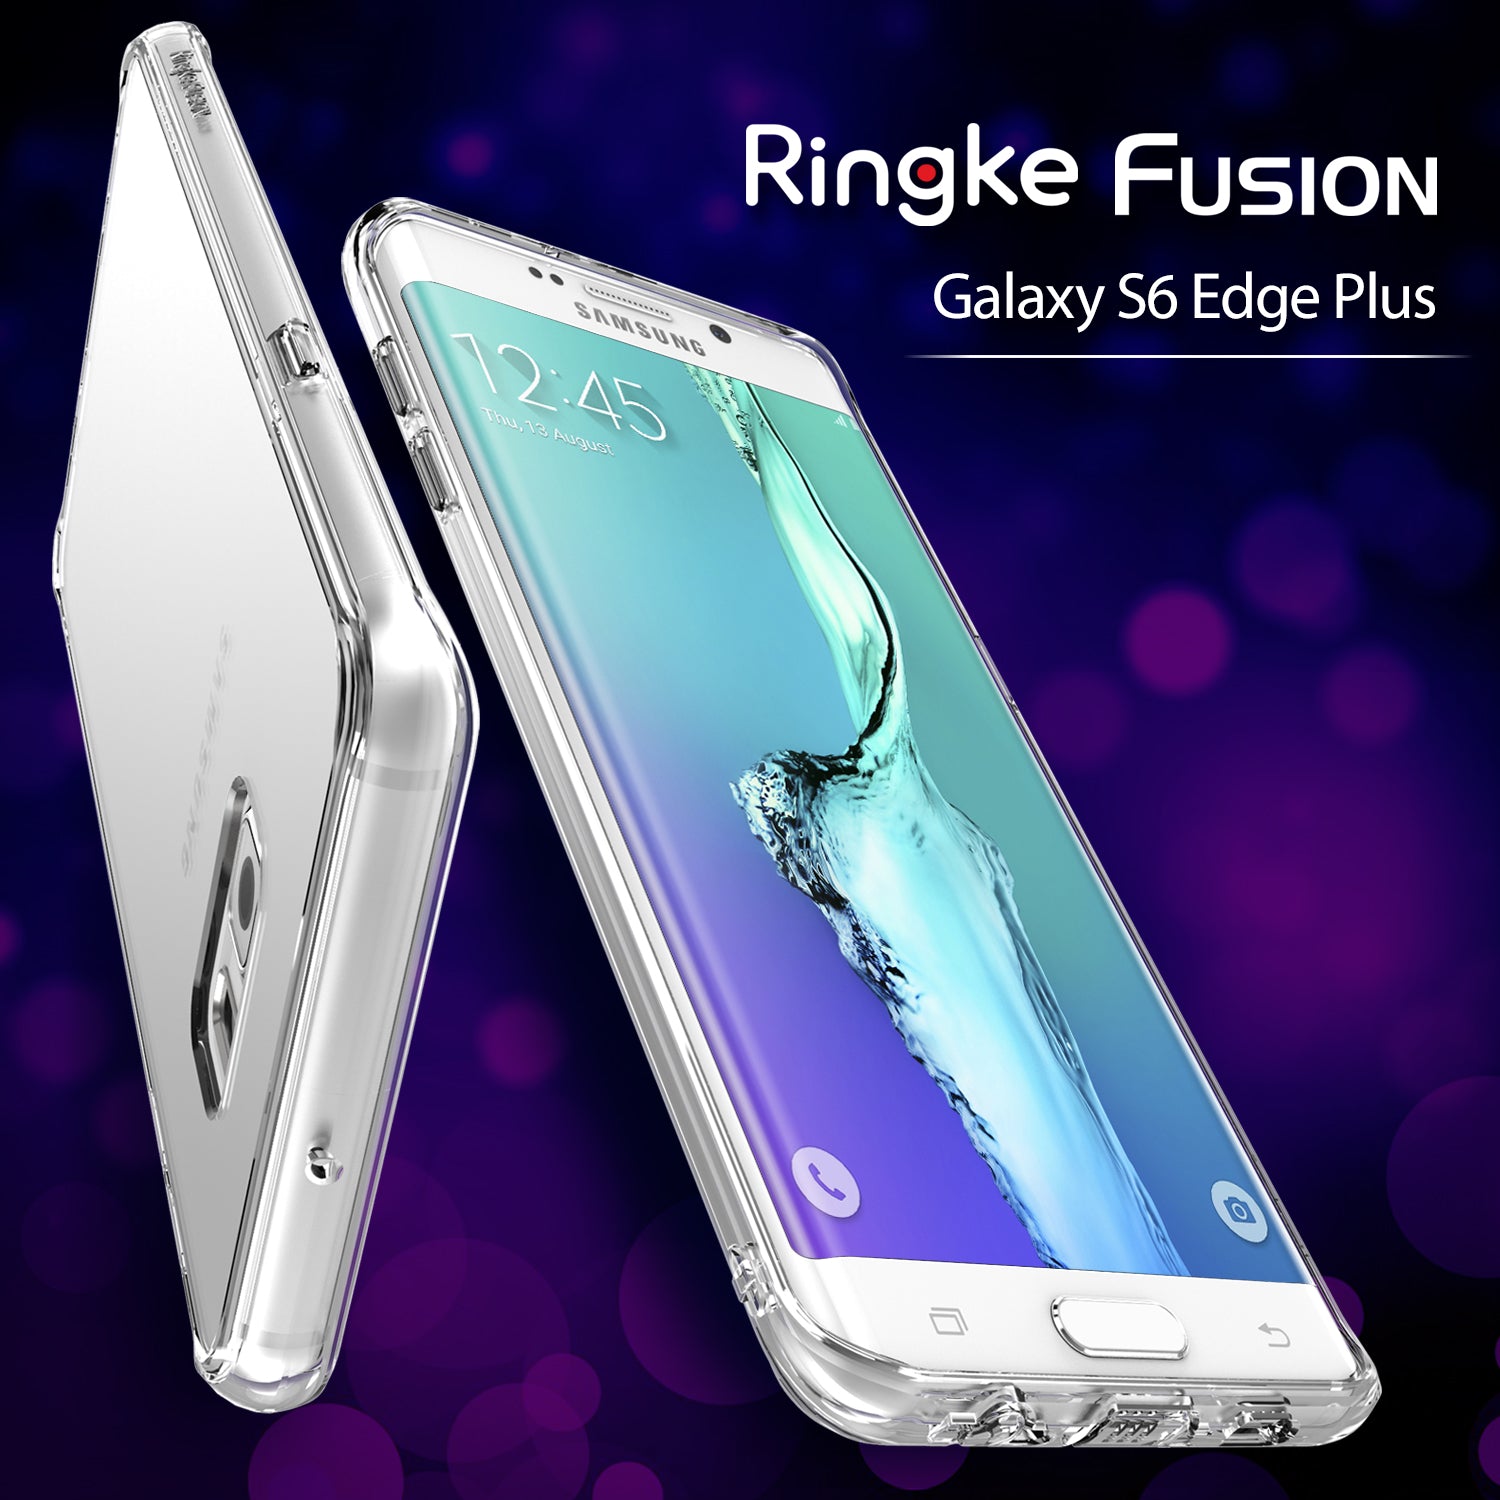 ringke fusion transparent clear hard back cover case for galaxy s6 edge plus